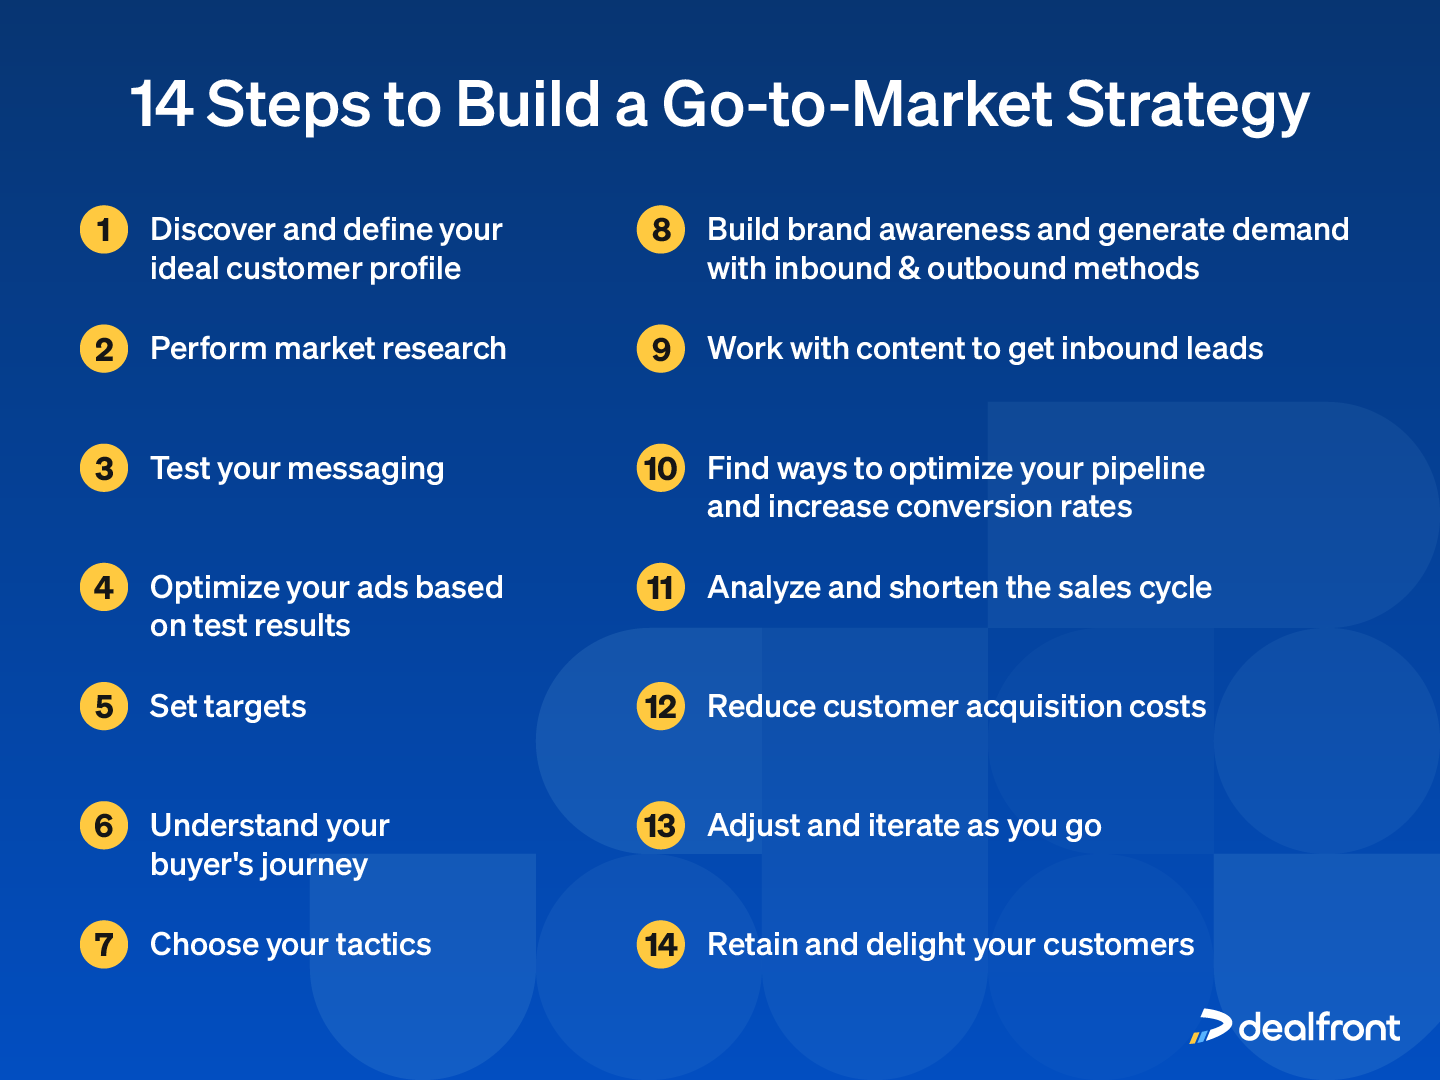 14 steps how to build a go-to-market strategy